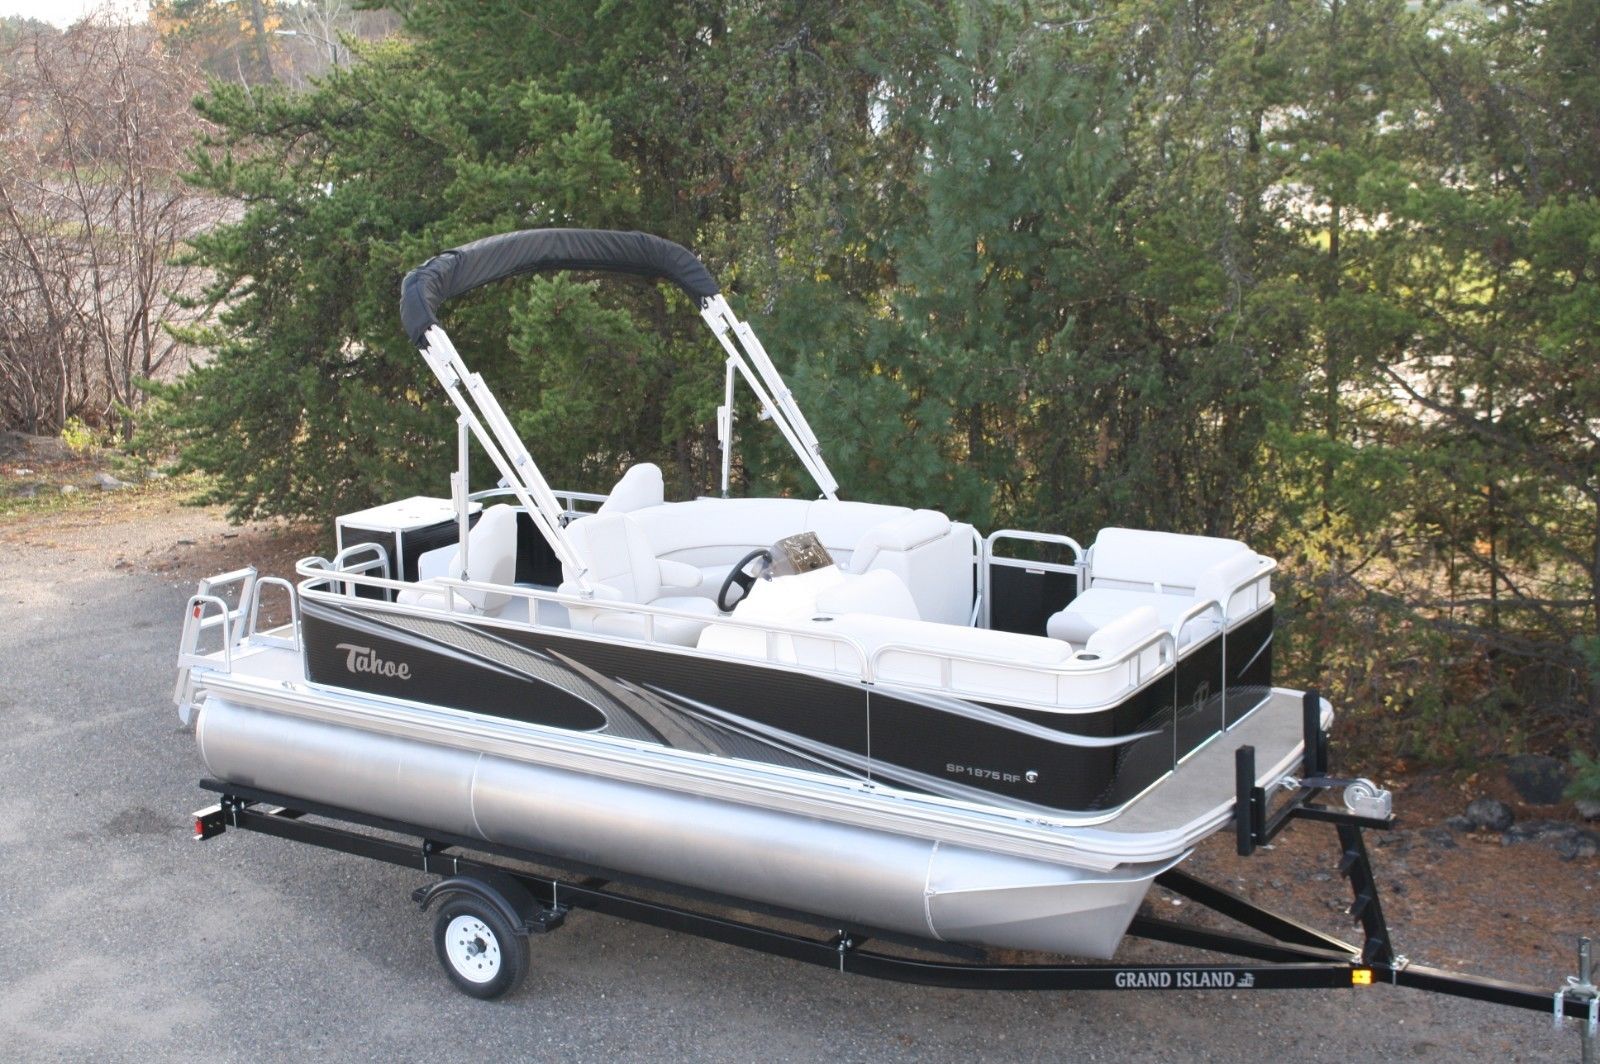 Factory direct Grand Island G series pontoon boat sales and Grand Island po...